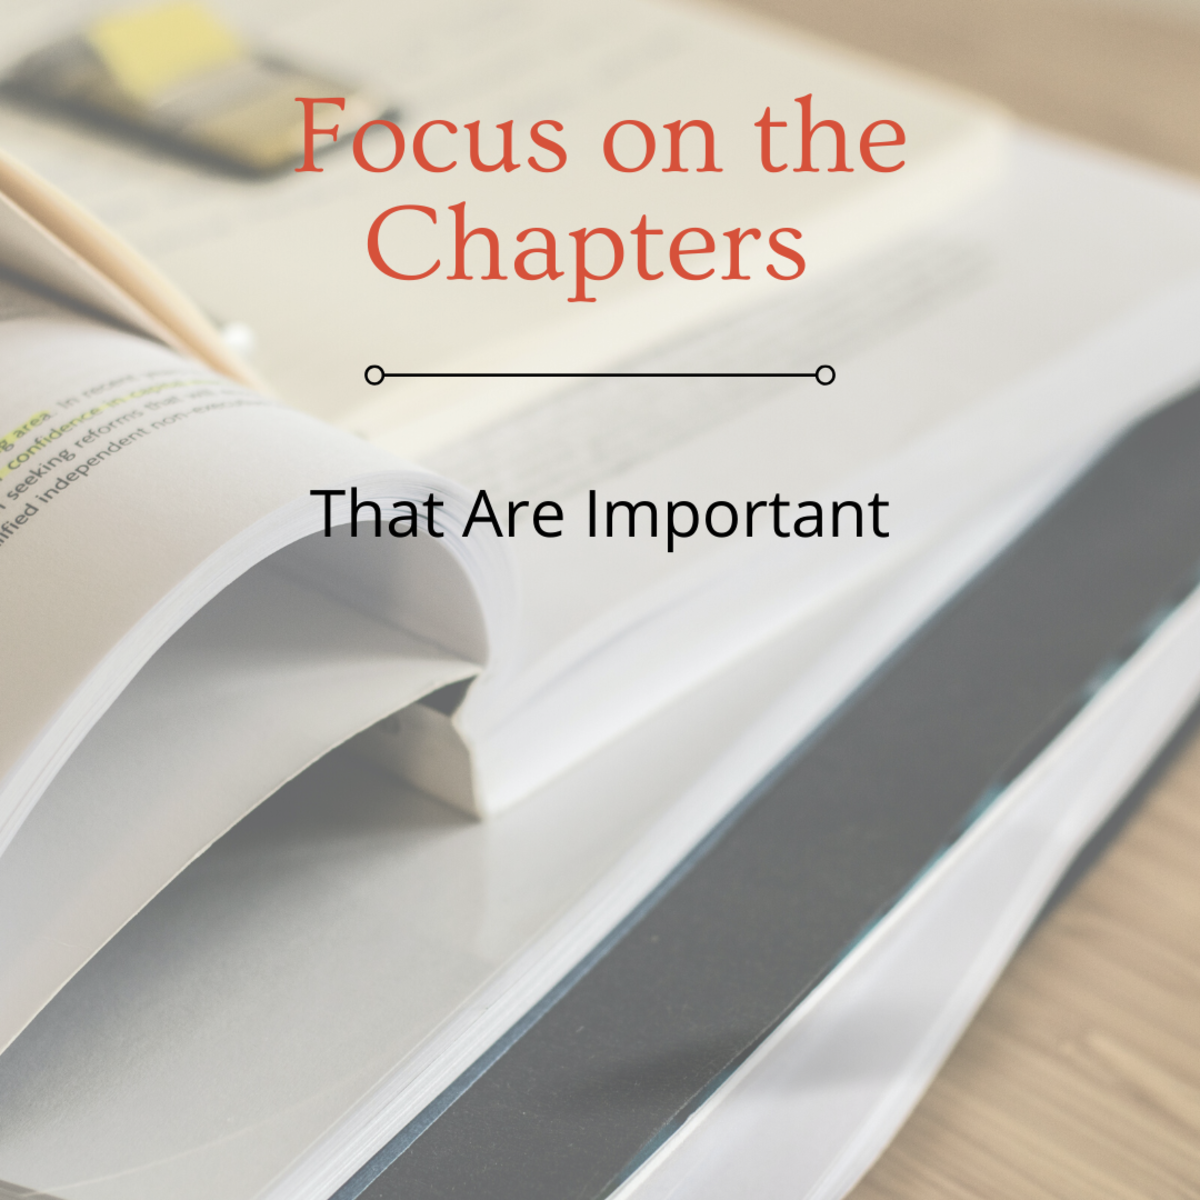 Focus only on the chapters that have the key information you need at this time.